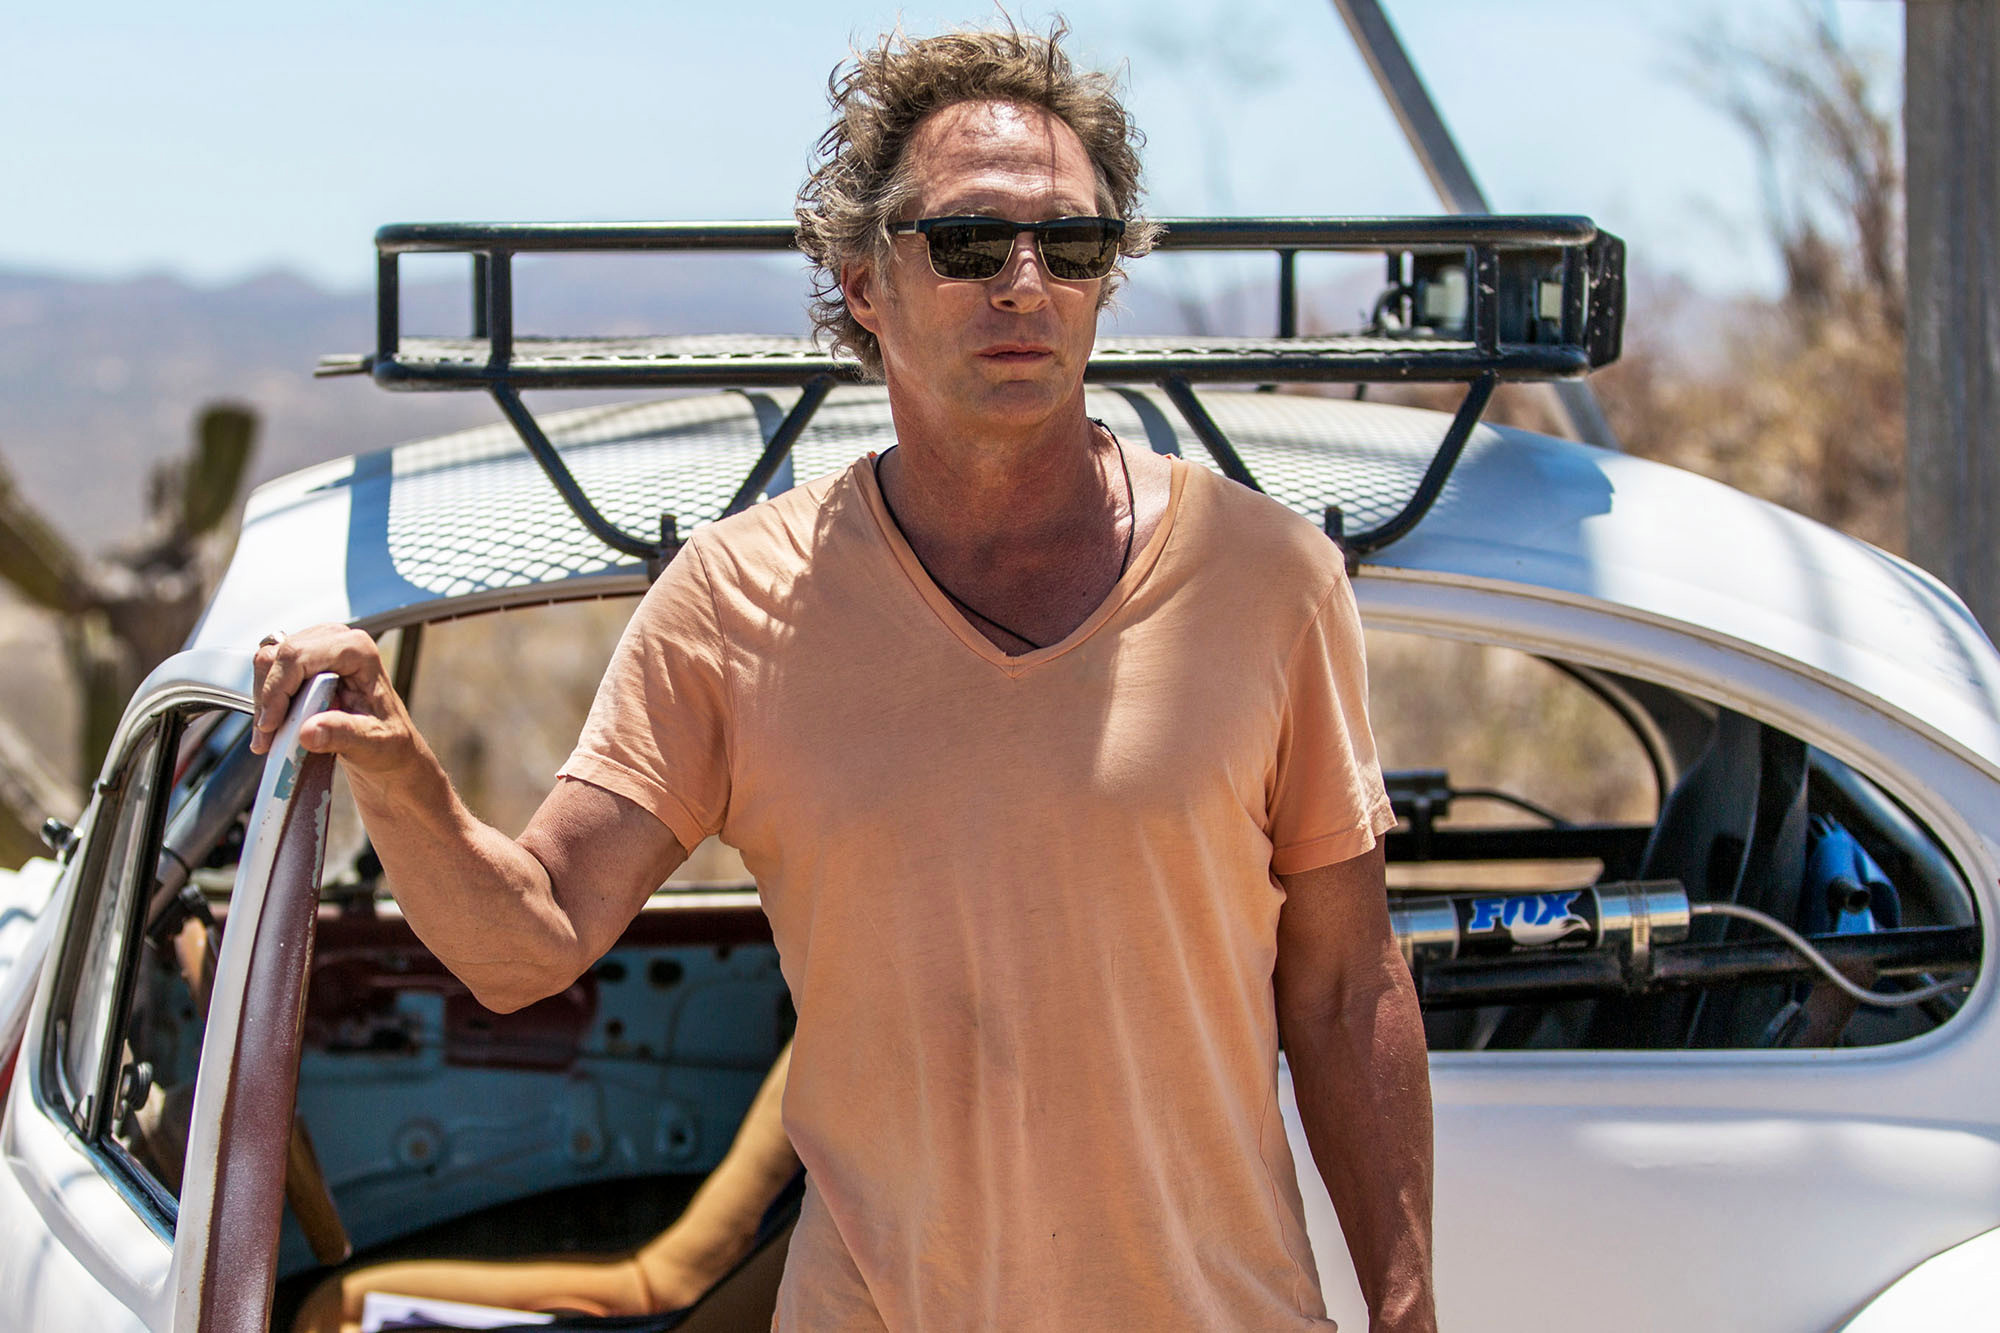 William "Bill" Fichtner is an American actor and a host o...